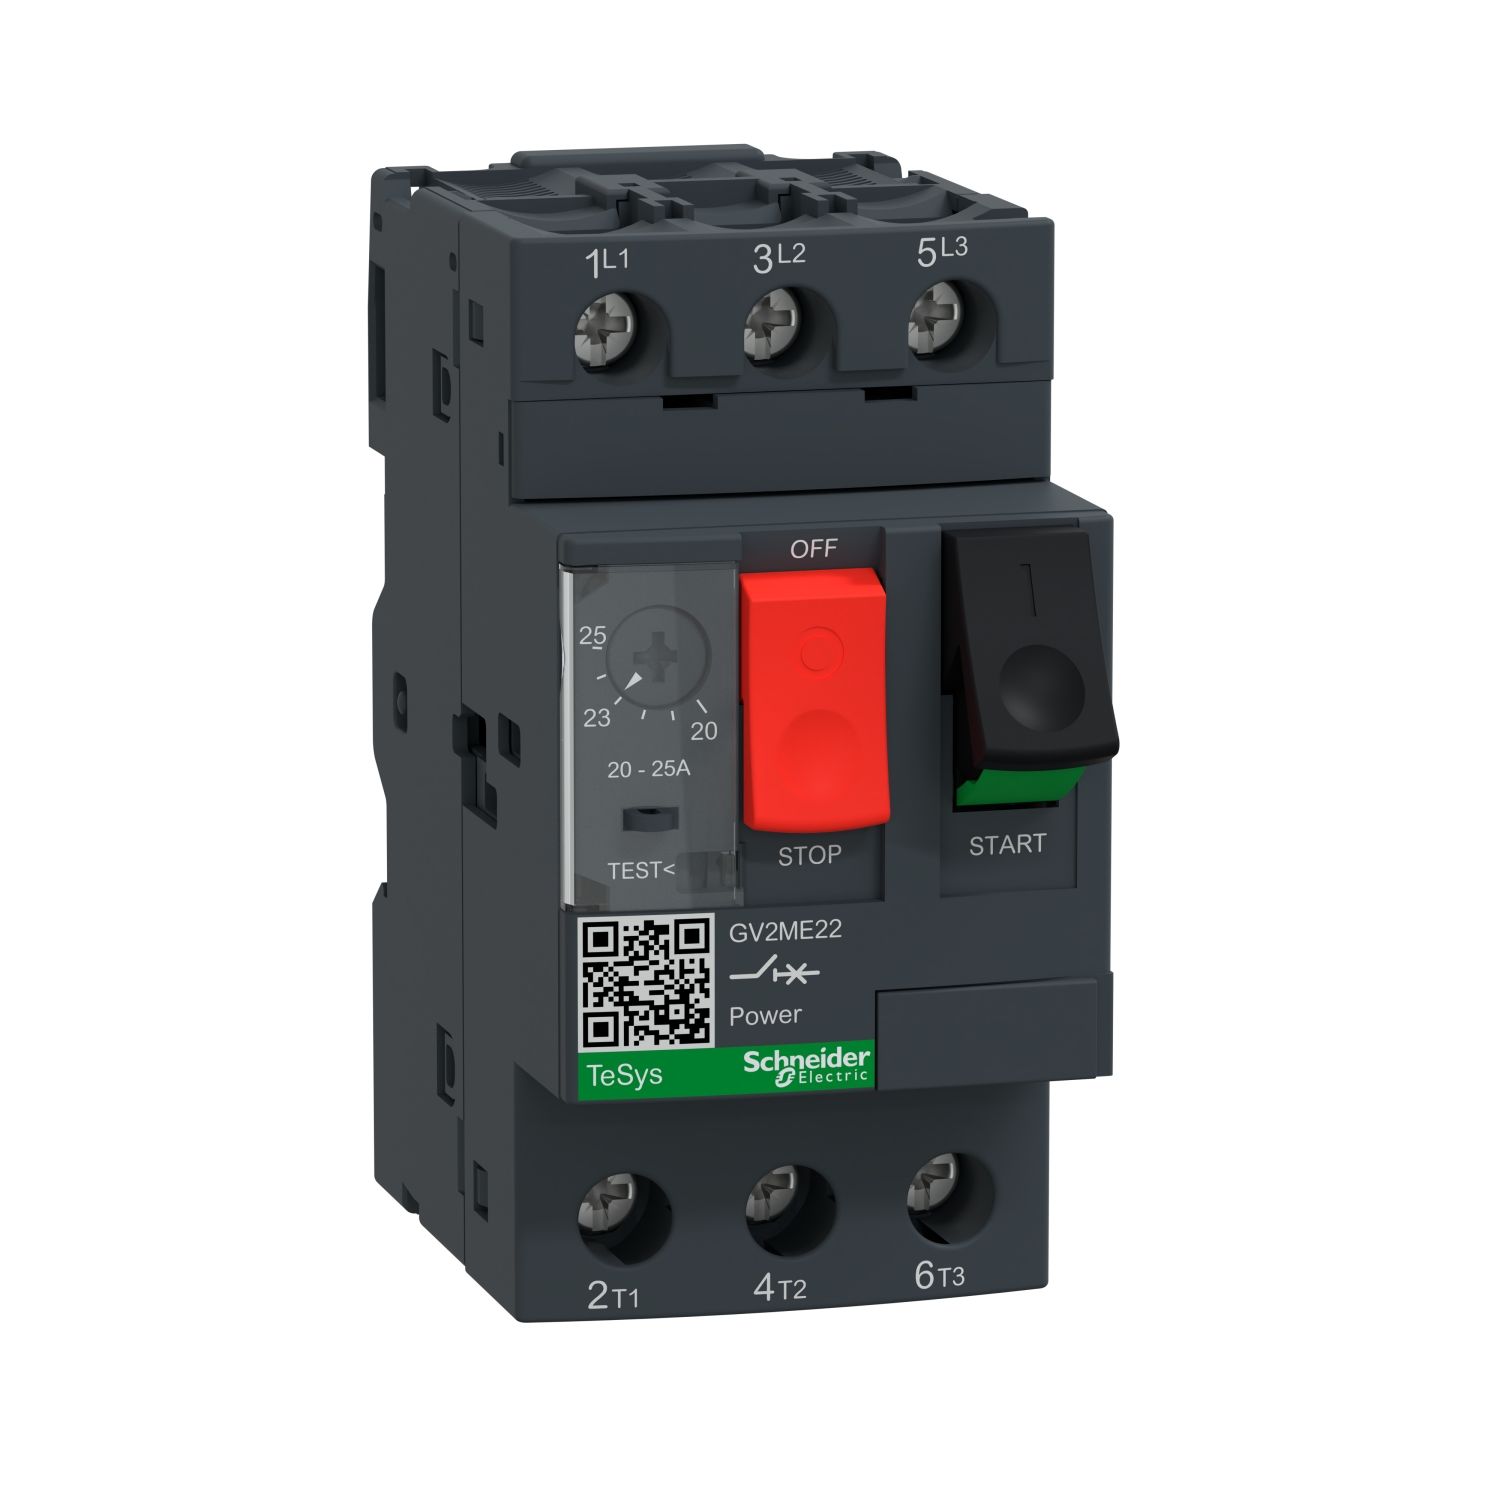 GV2ME22 Motor circuit breaker, TeSys Deca, 3P, 20 to 25A, thermal magnetic, screw clamp terminals, button control